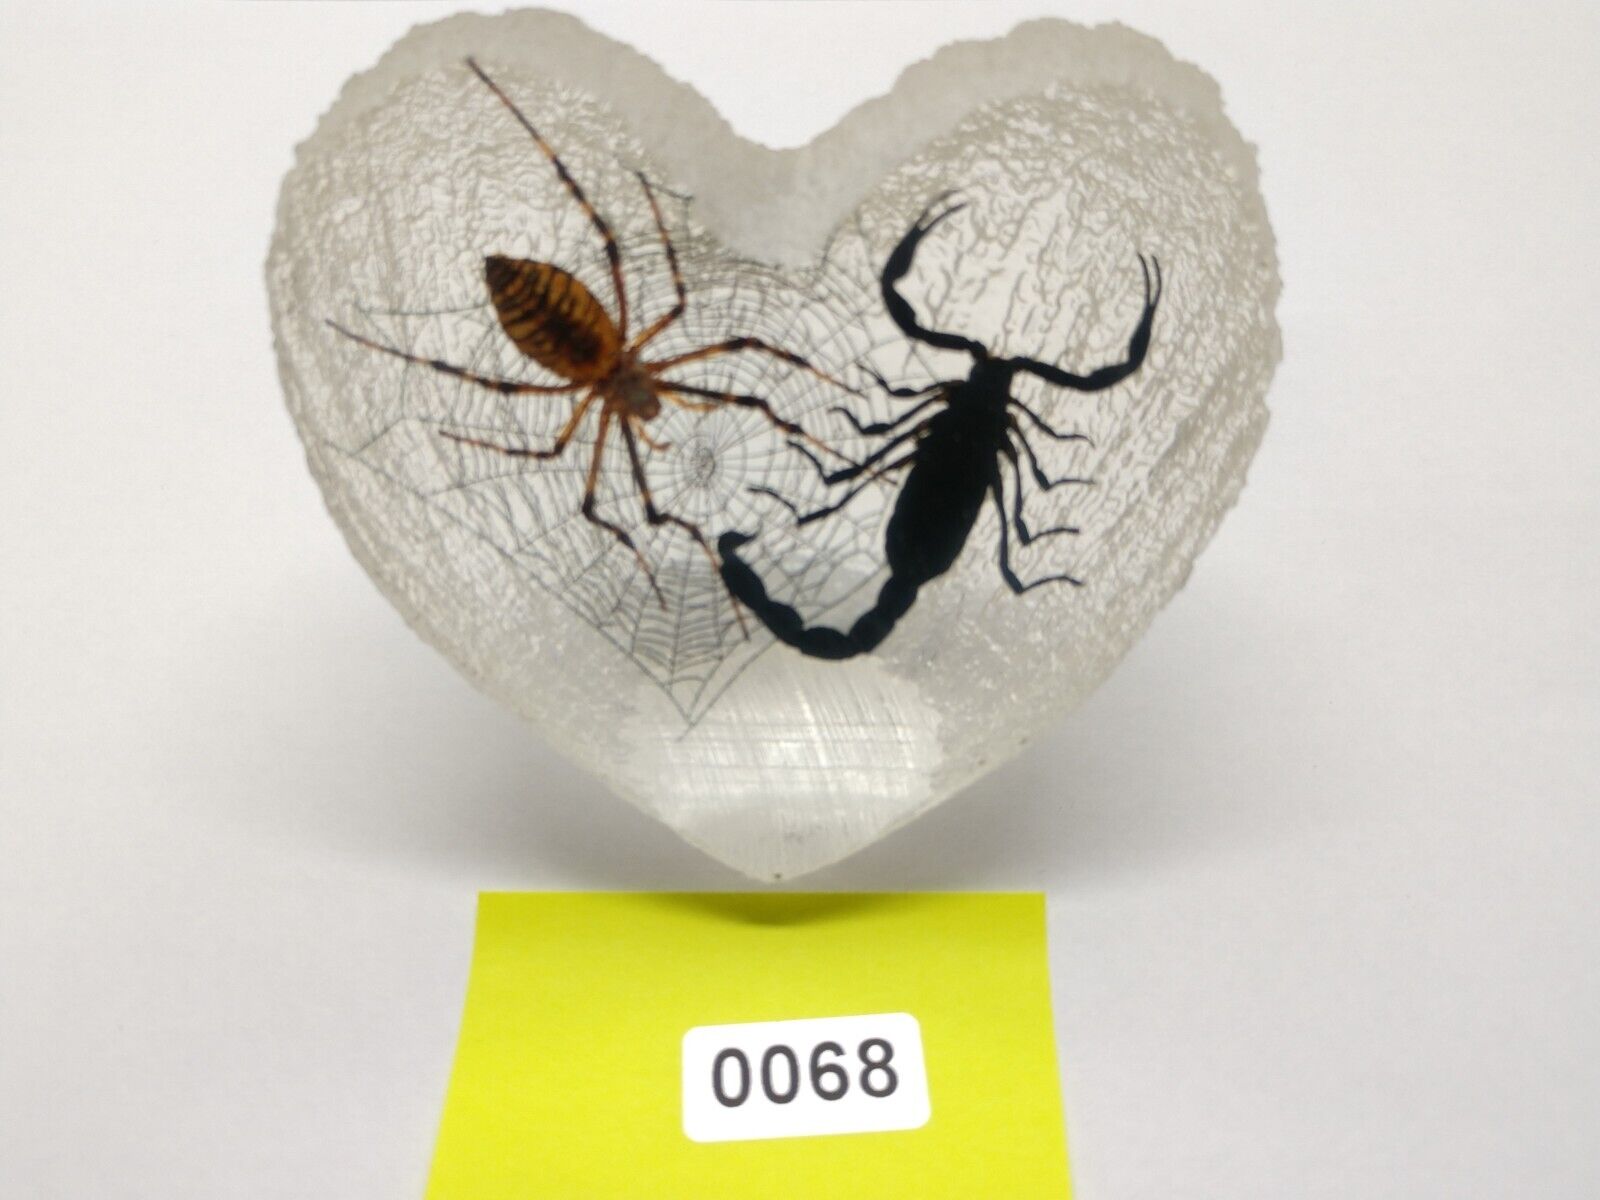 Real Spider And Scorpion Encased In Lucite Shaped  Heart